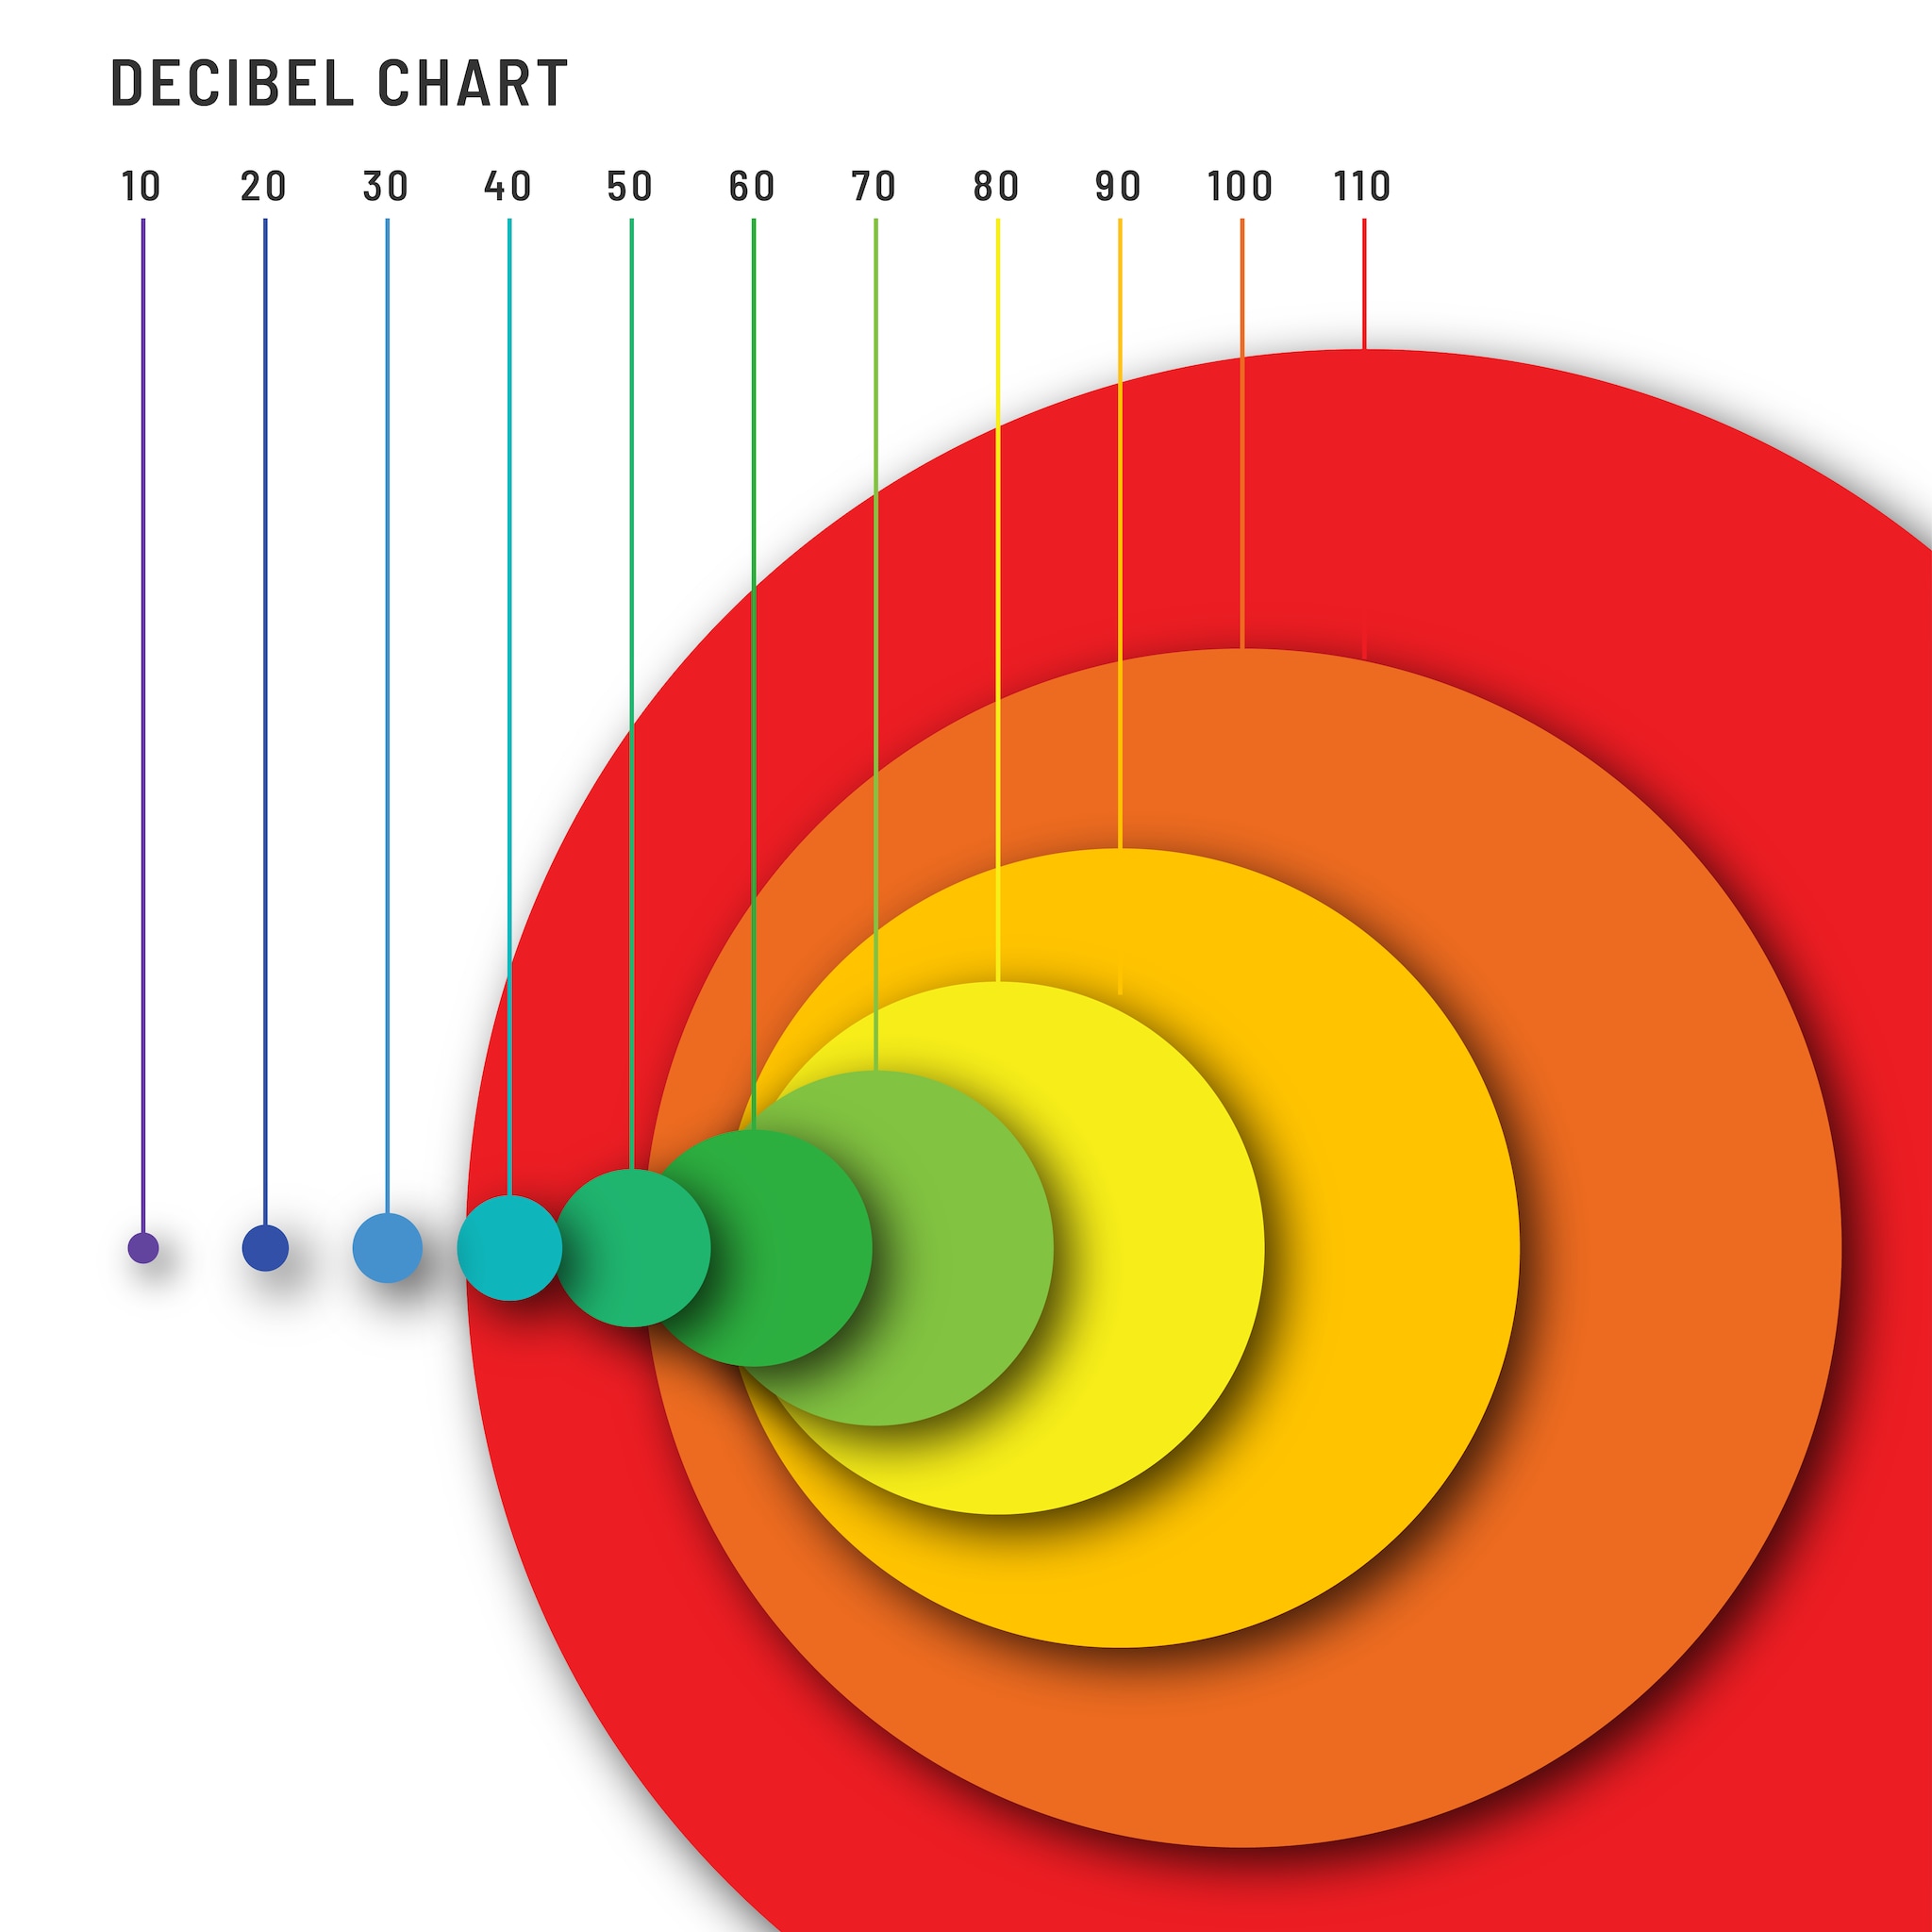 A decibel chart depicting concentric circles growing in size logarithmically